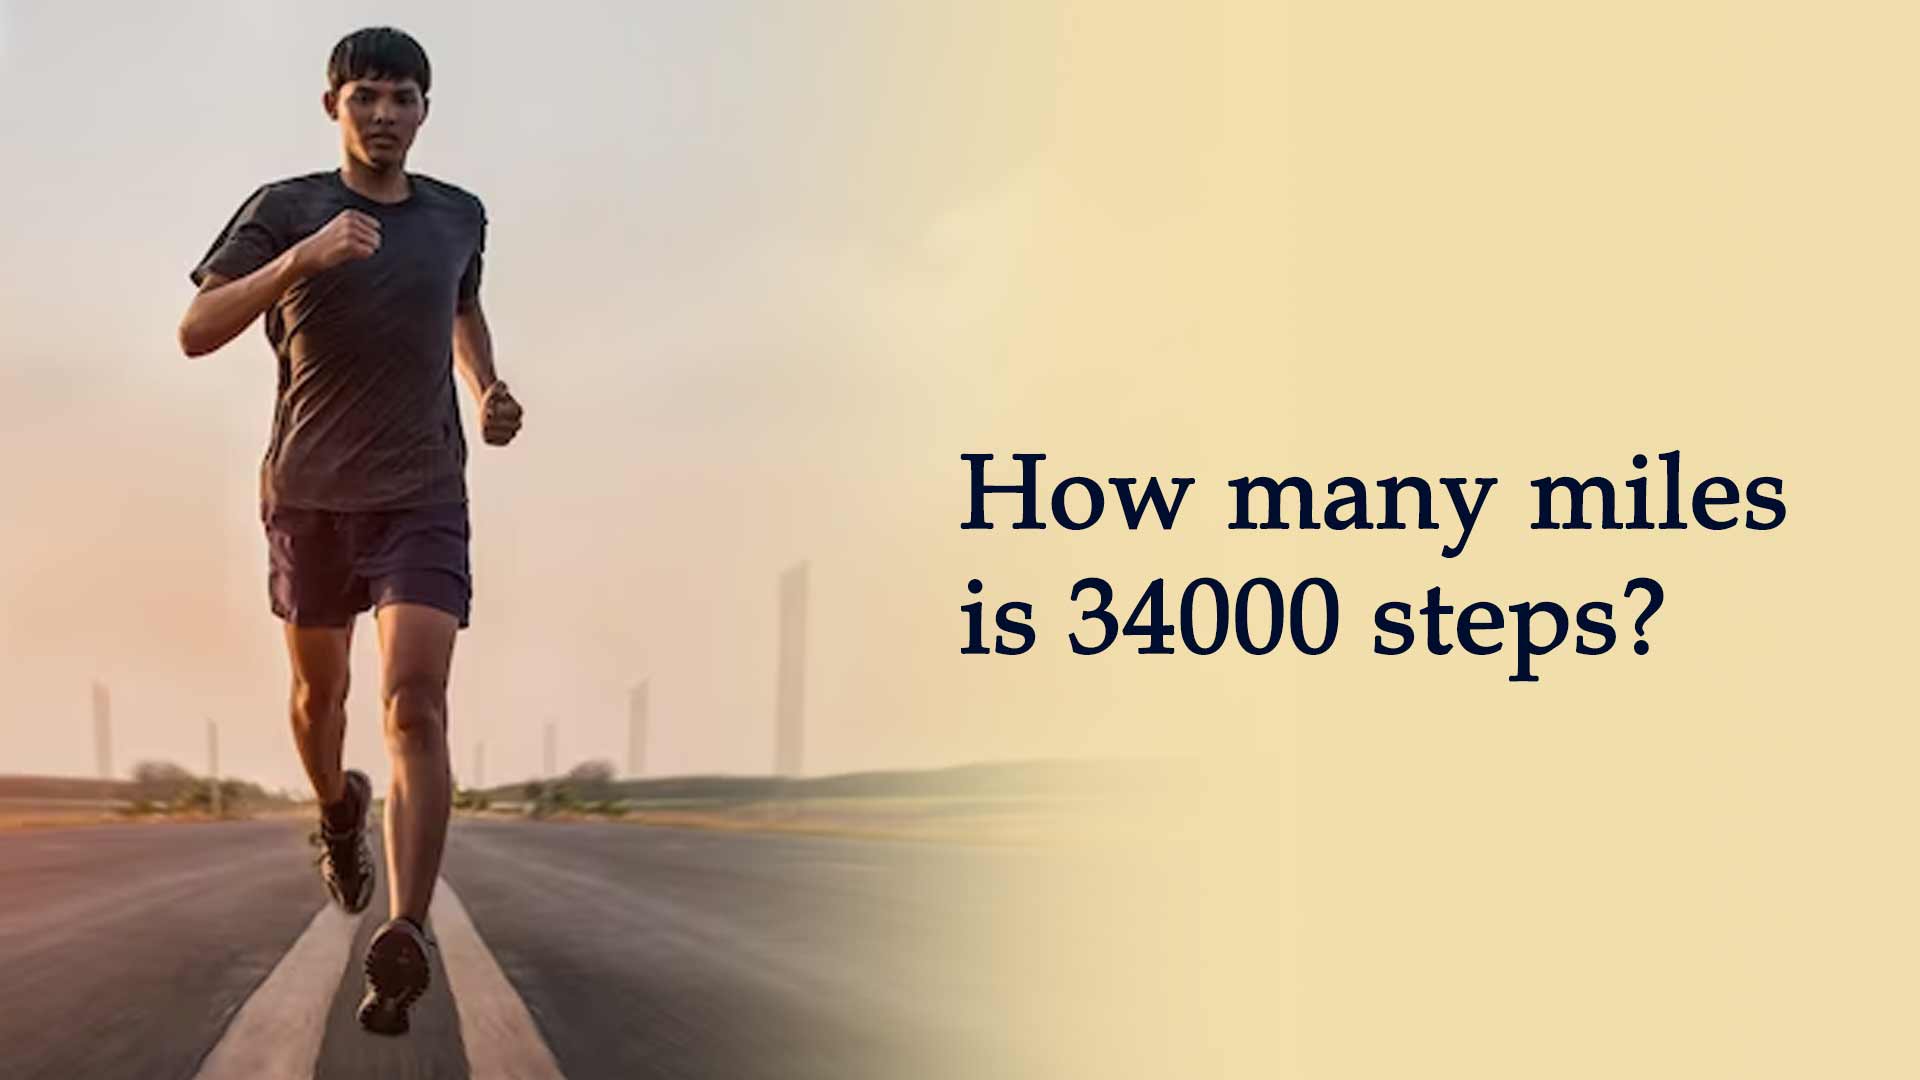 How many miles is 34000 steps